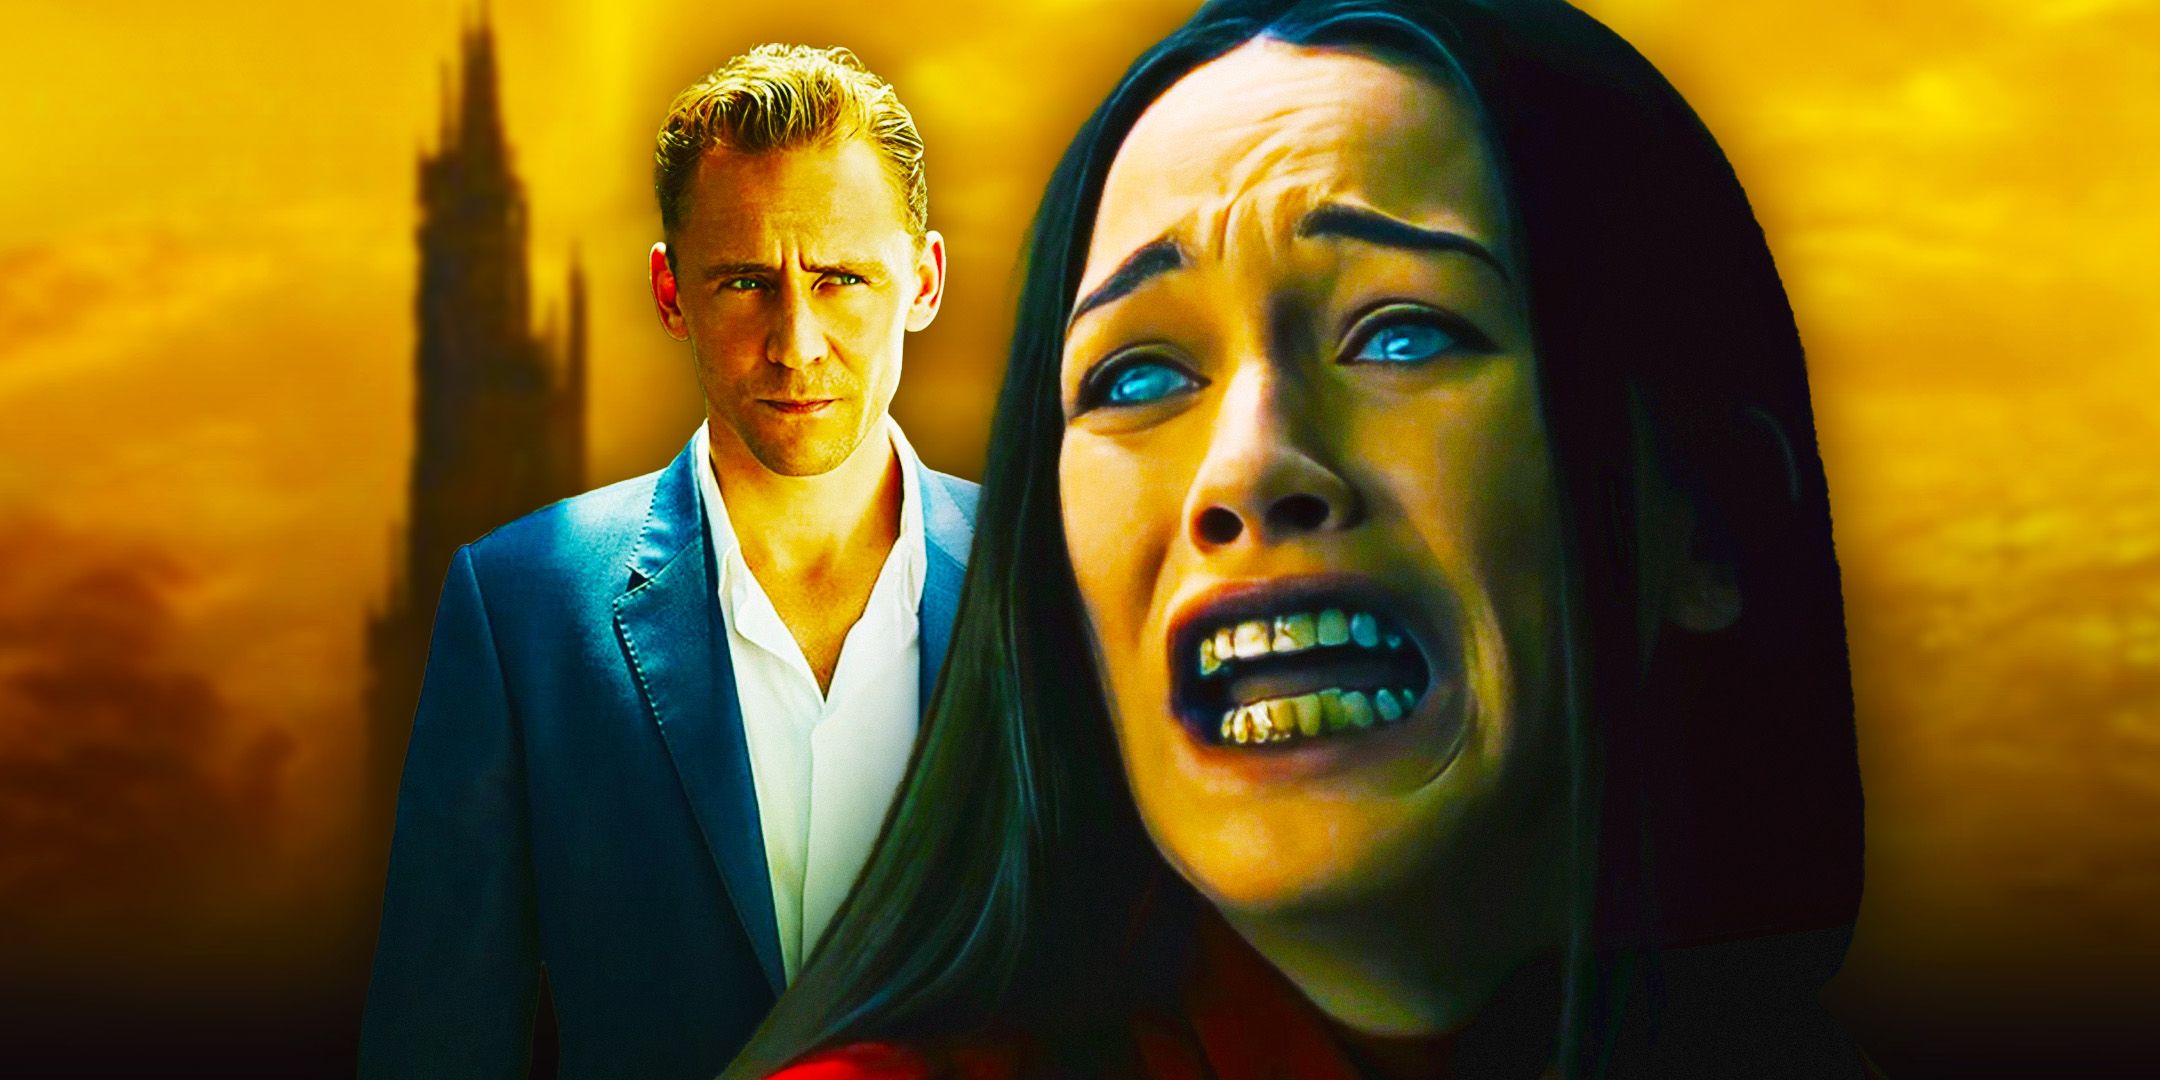 Collage of Tom Hiddleston with Victoria Pedretti in Mike Flanagan's The Haunting of Hill House and The Dark Tower art in the background